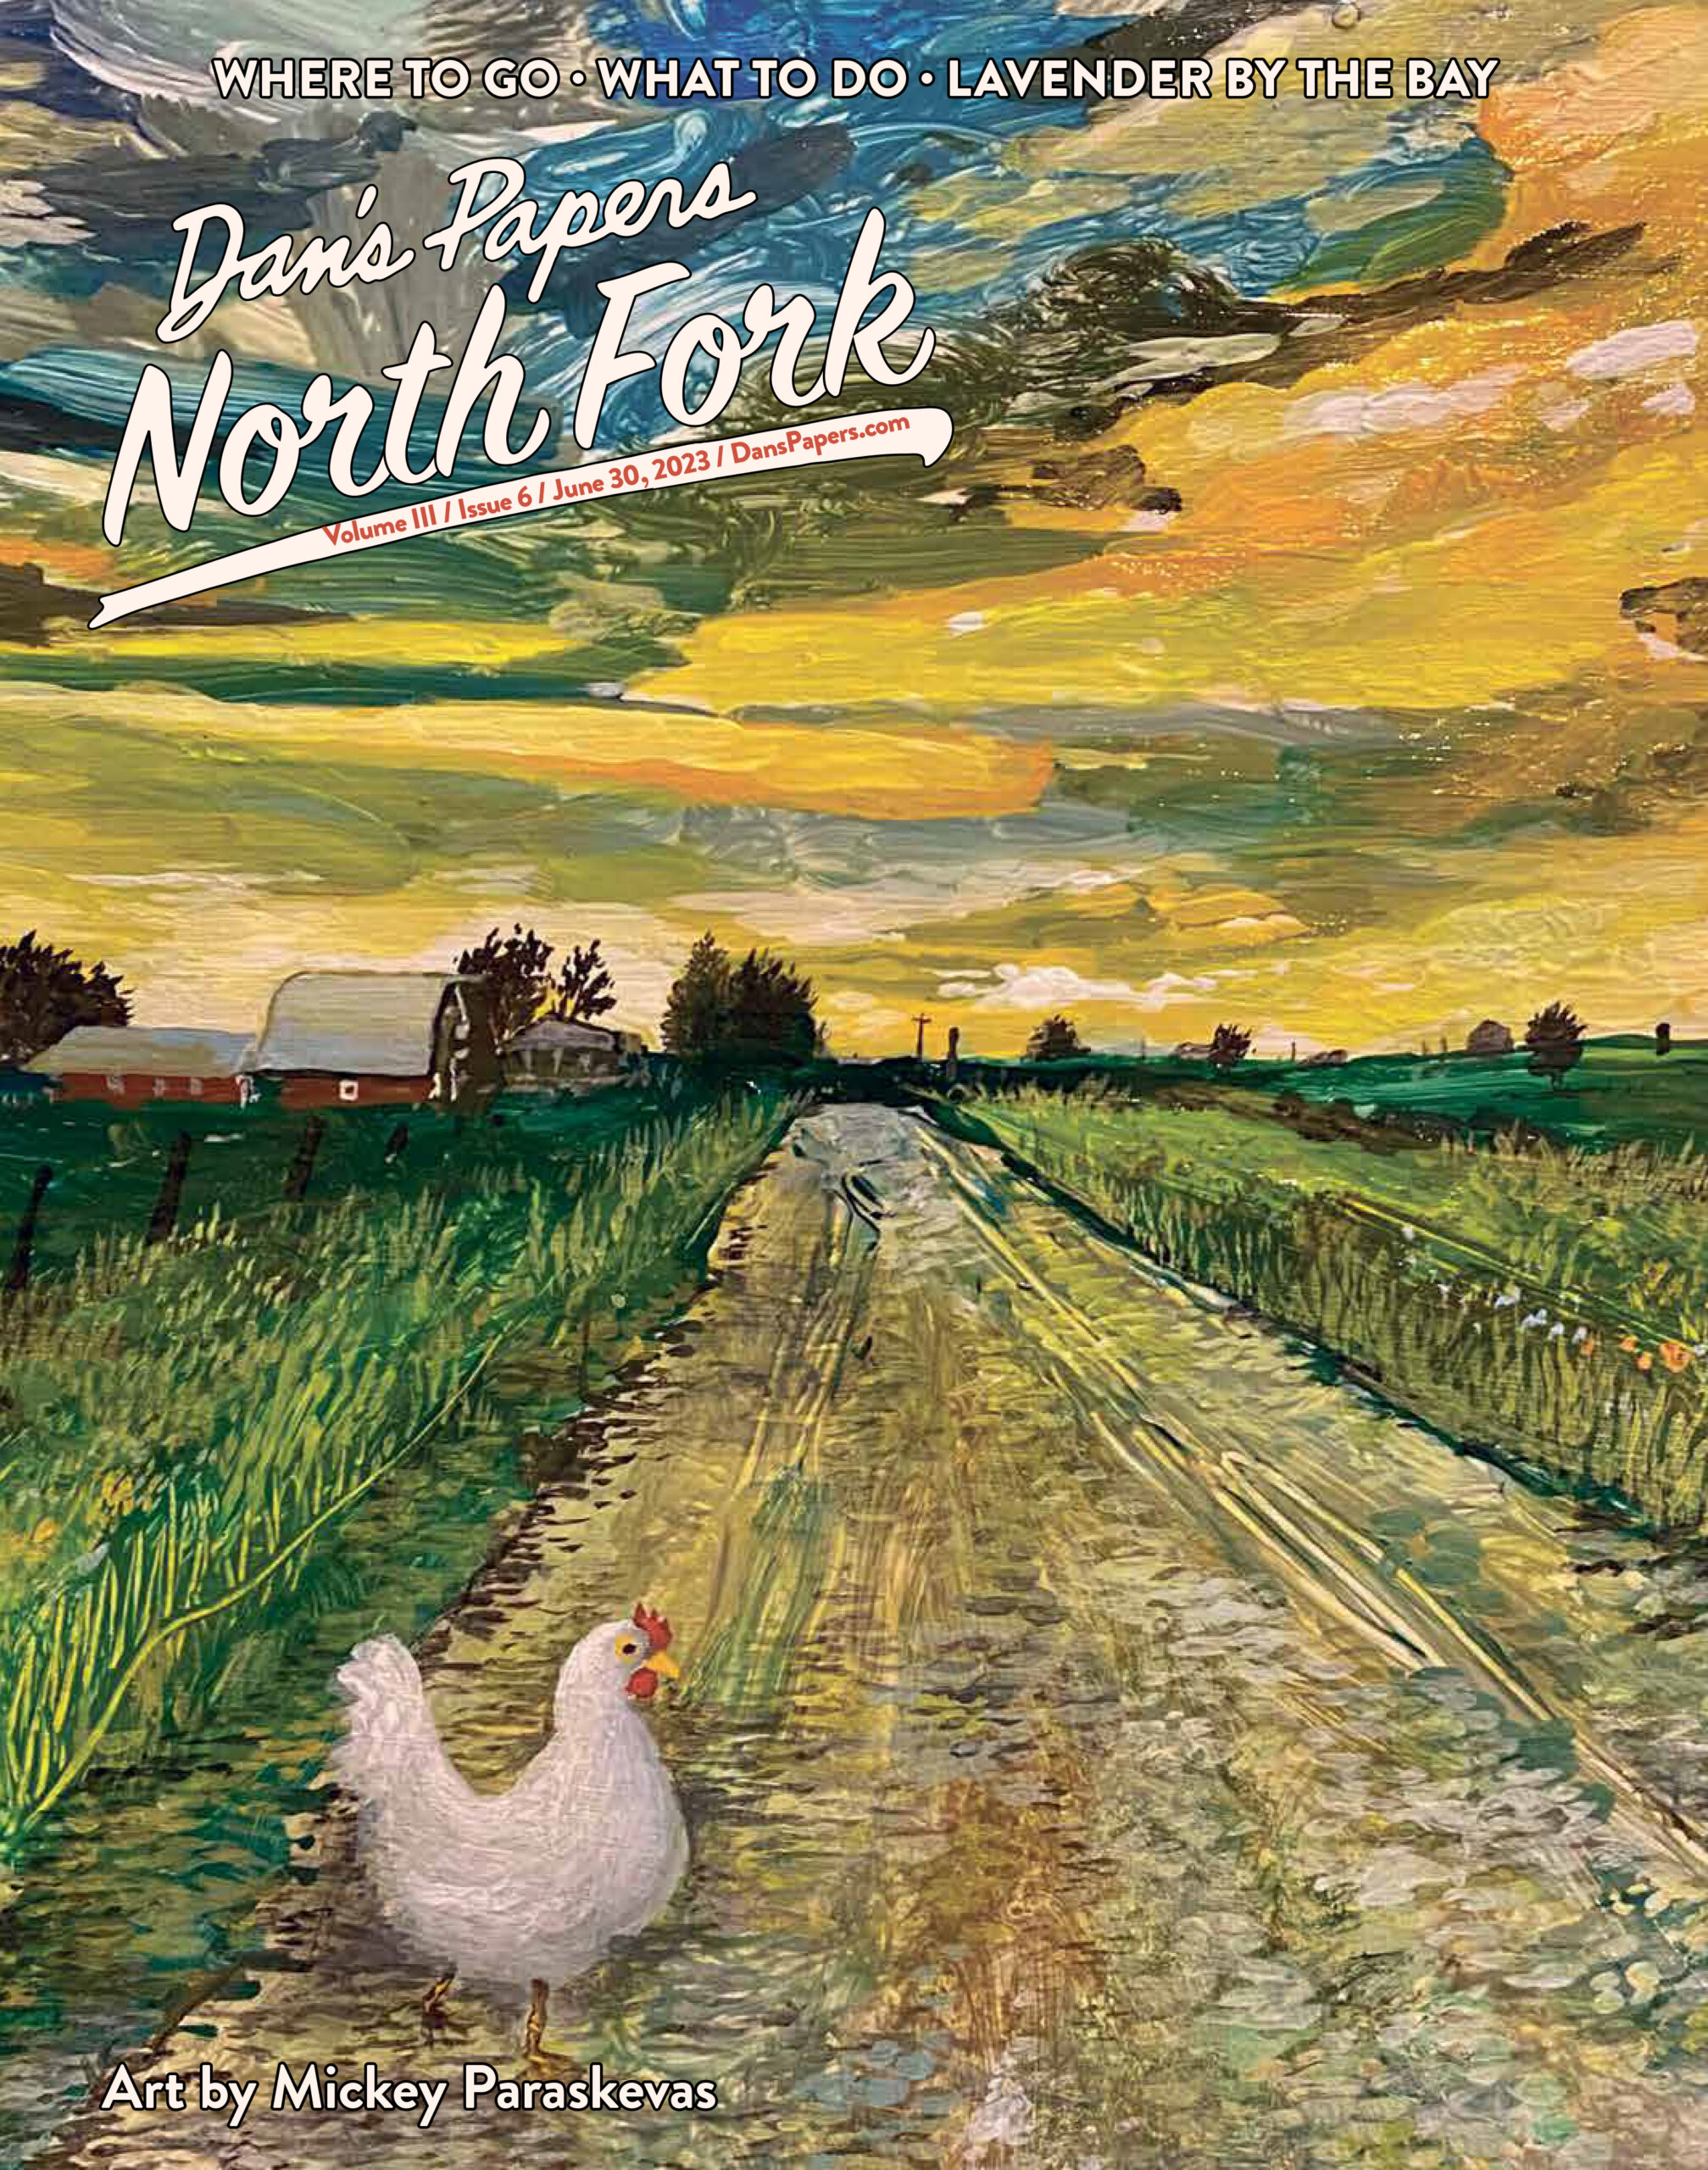 June 30, 2023 Dan's Papers North Fork cover art by Mickey Paraskevas